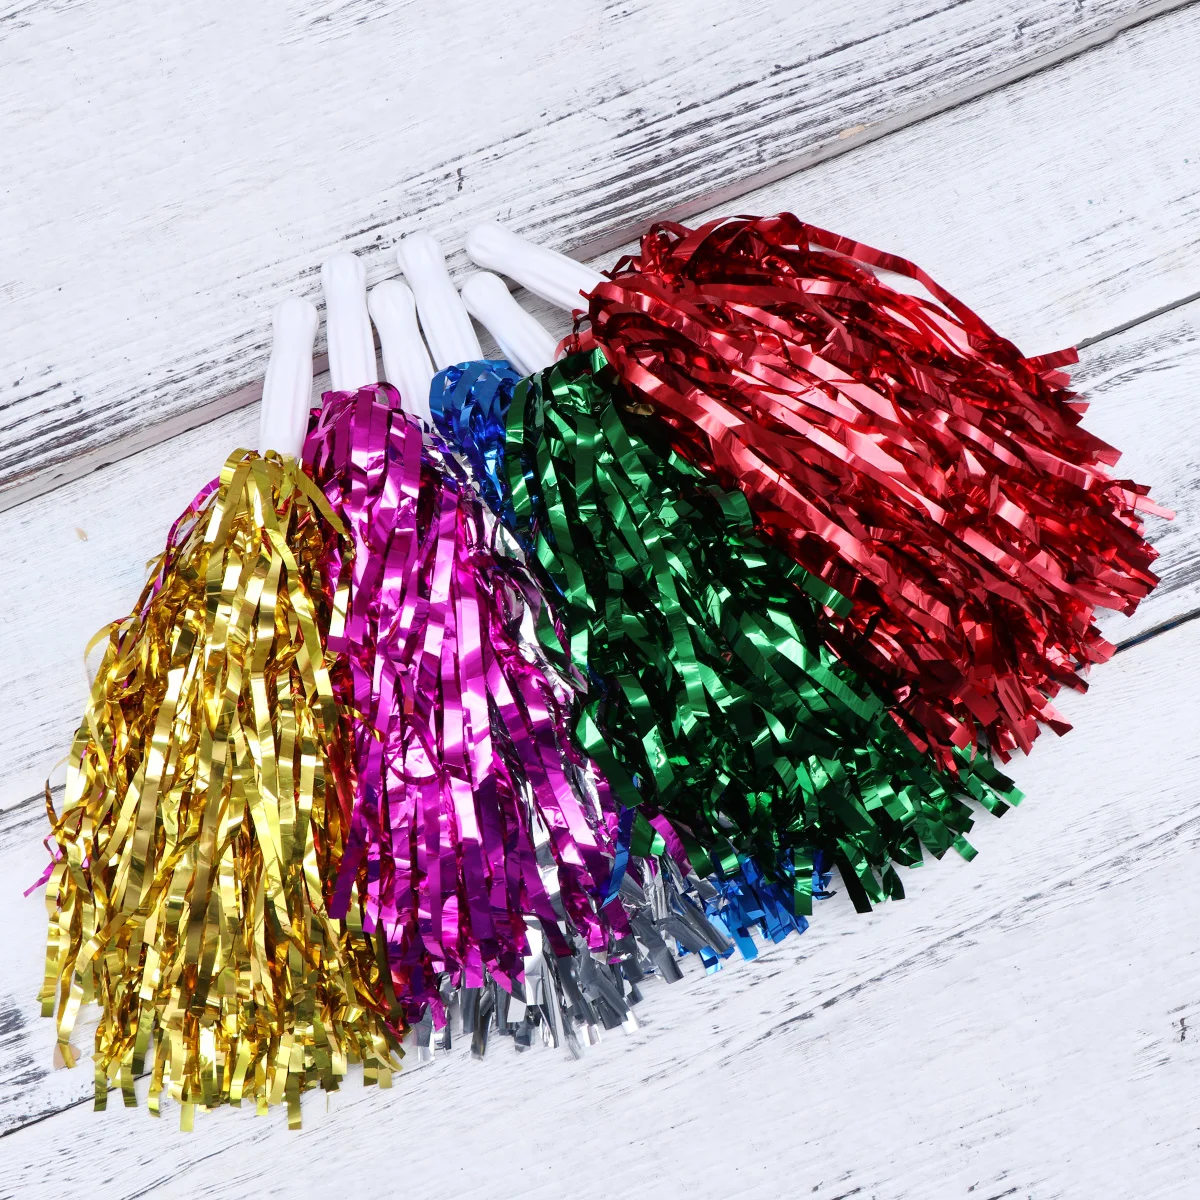 12pcs Straight Handle Cheering Poms Spirited Fun Cheerleading Kit Cheer Props for Performance Competition Cheering Sports Events 12pcs stray kids glitter cheer pom poms cheerleading poms spirited fun pom poms for school competition sports stray